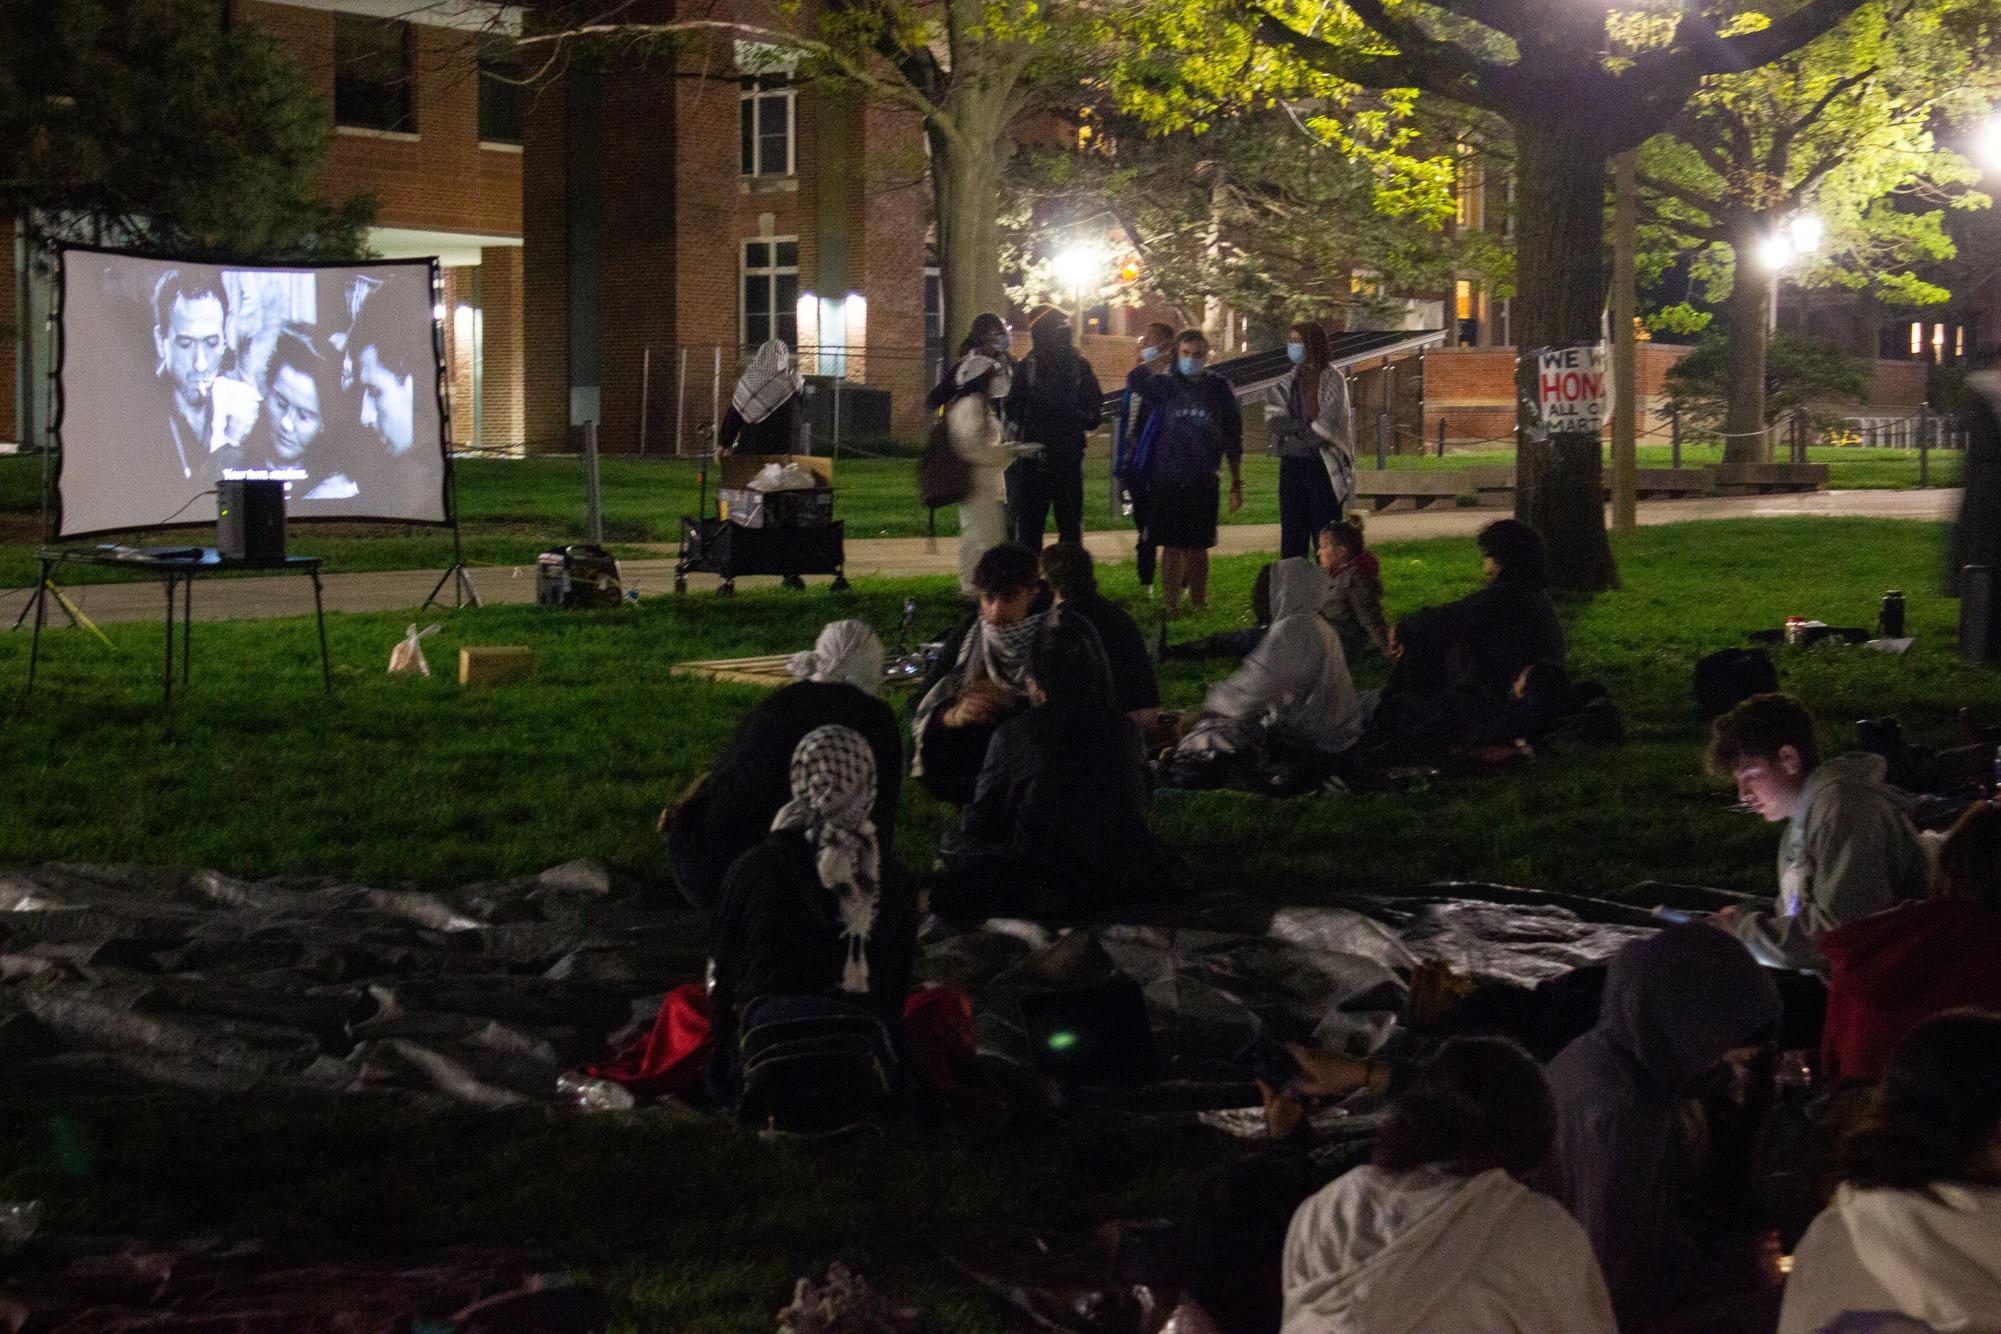 People gather at the Main Quad in the evening to view a screening held at the Palestine encampment protest on Monday night.